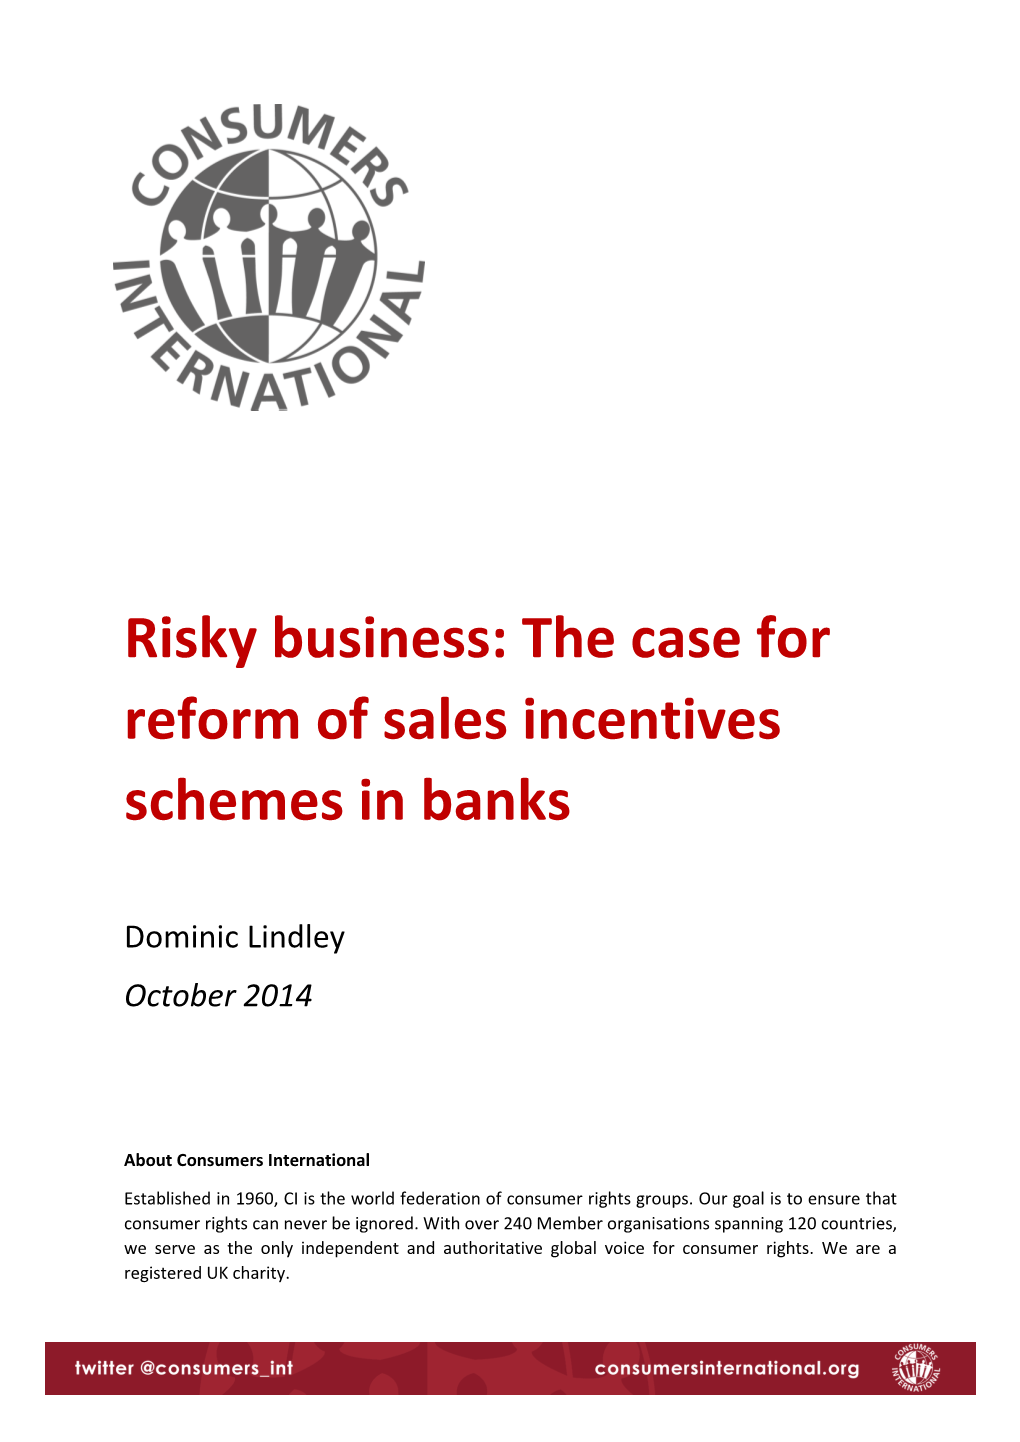 Risky Business: the Case for Reform of Sales Incentives Schemes in Banks